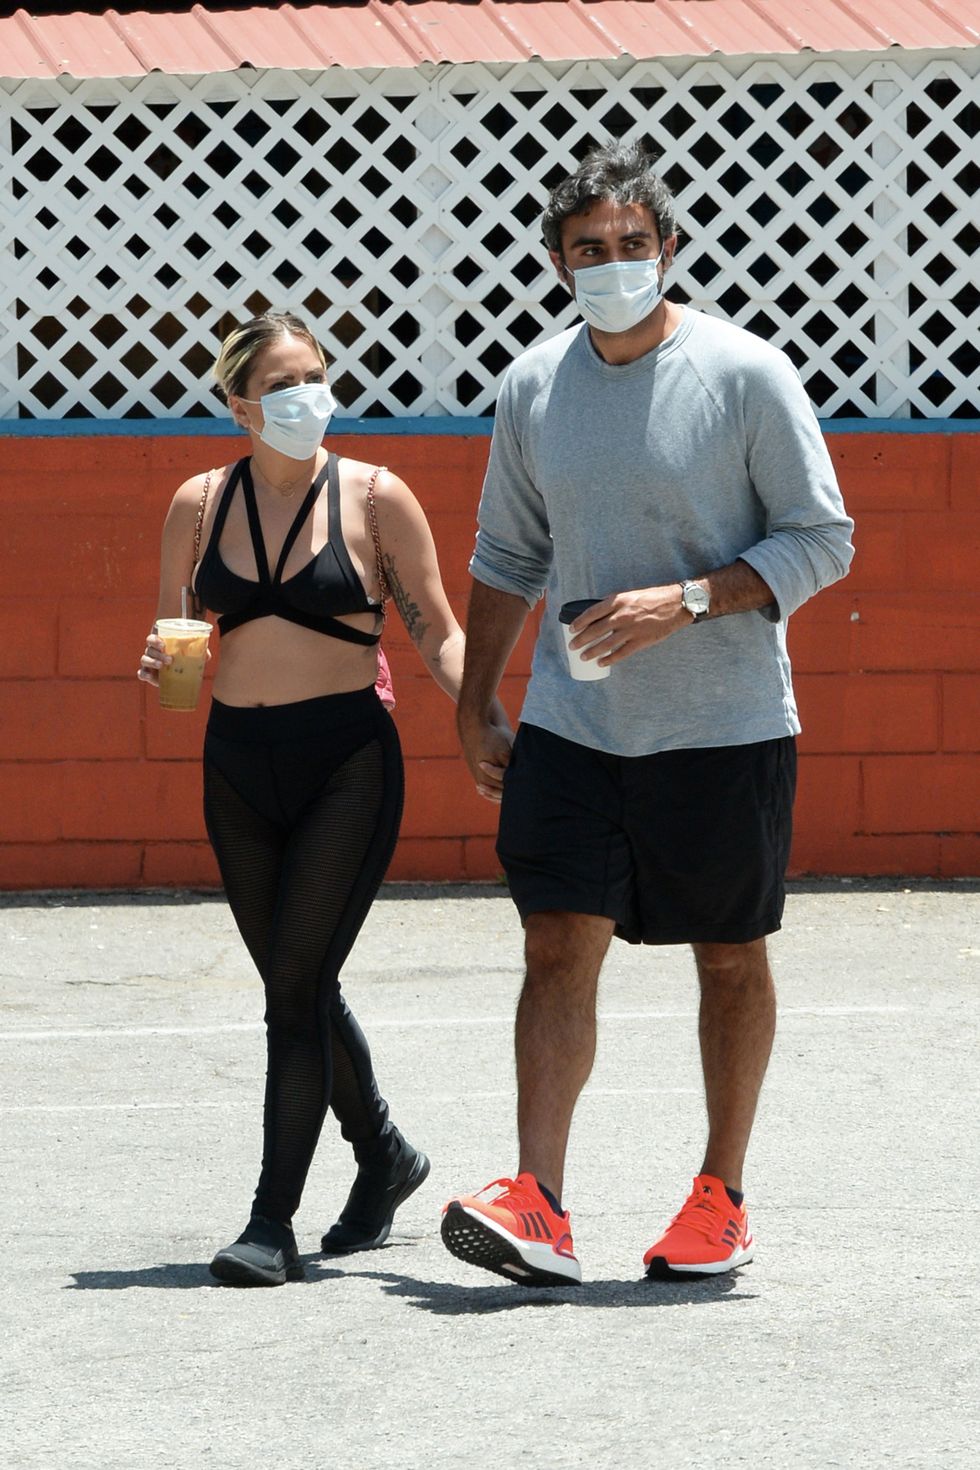 exclusive singer lady gaga and boyfriend michael polansky hold hands as they grab morning coffee in hollywood 30 may 2020 pictured lady gaga michael polansky photo credit mega themegaagencycom 1 888 505 6342 mega agency tagid mega674660021jpg photo via mega agency